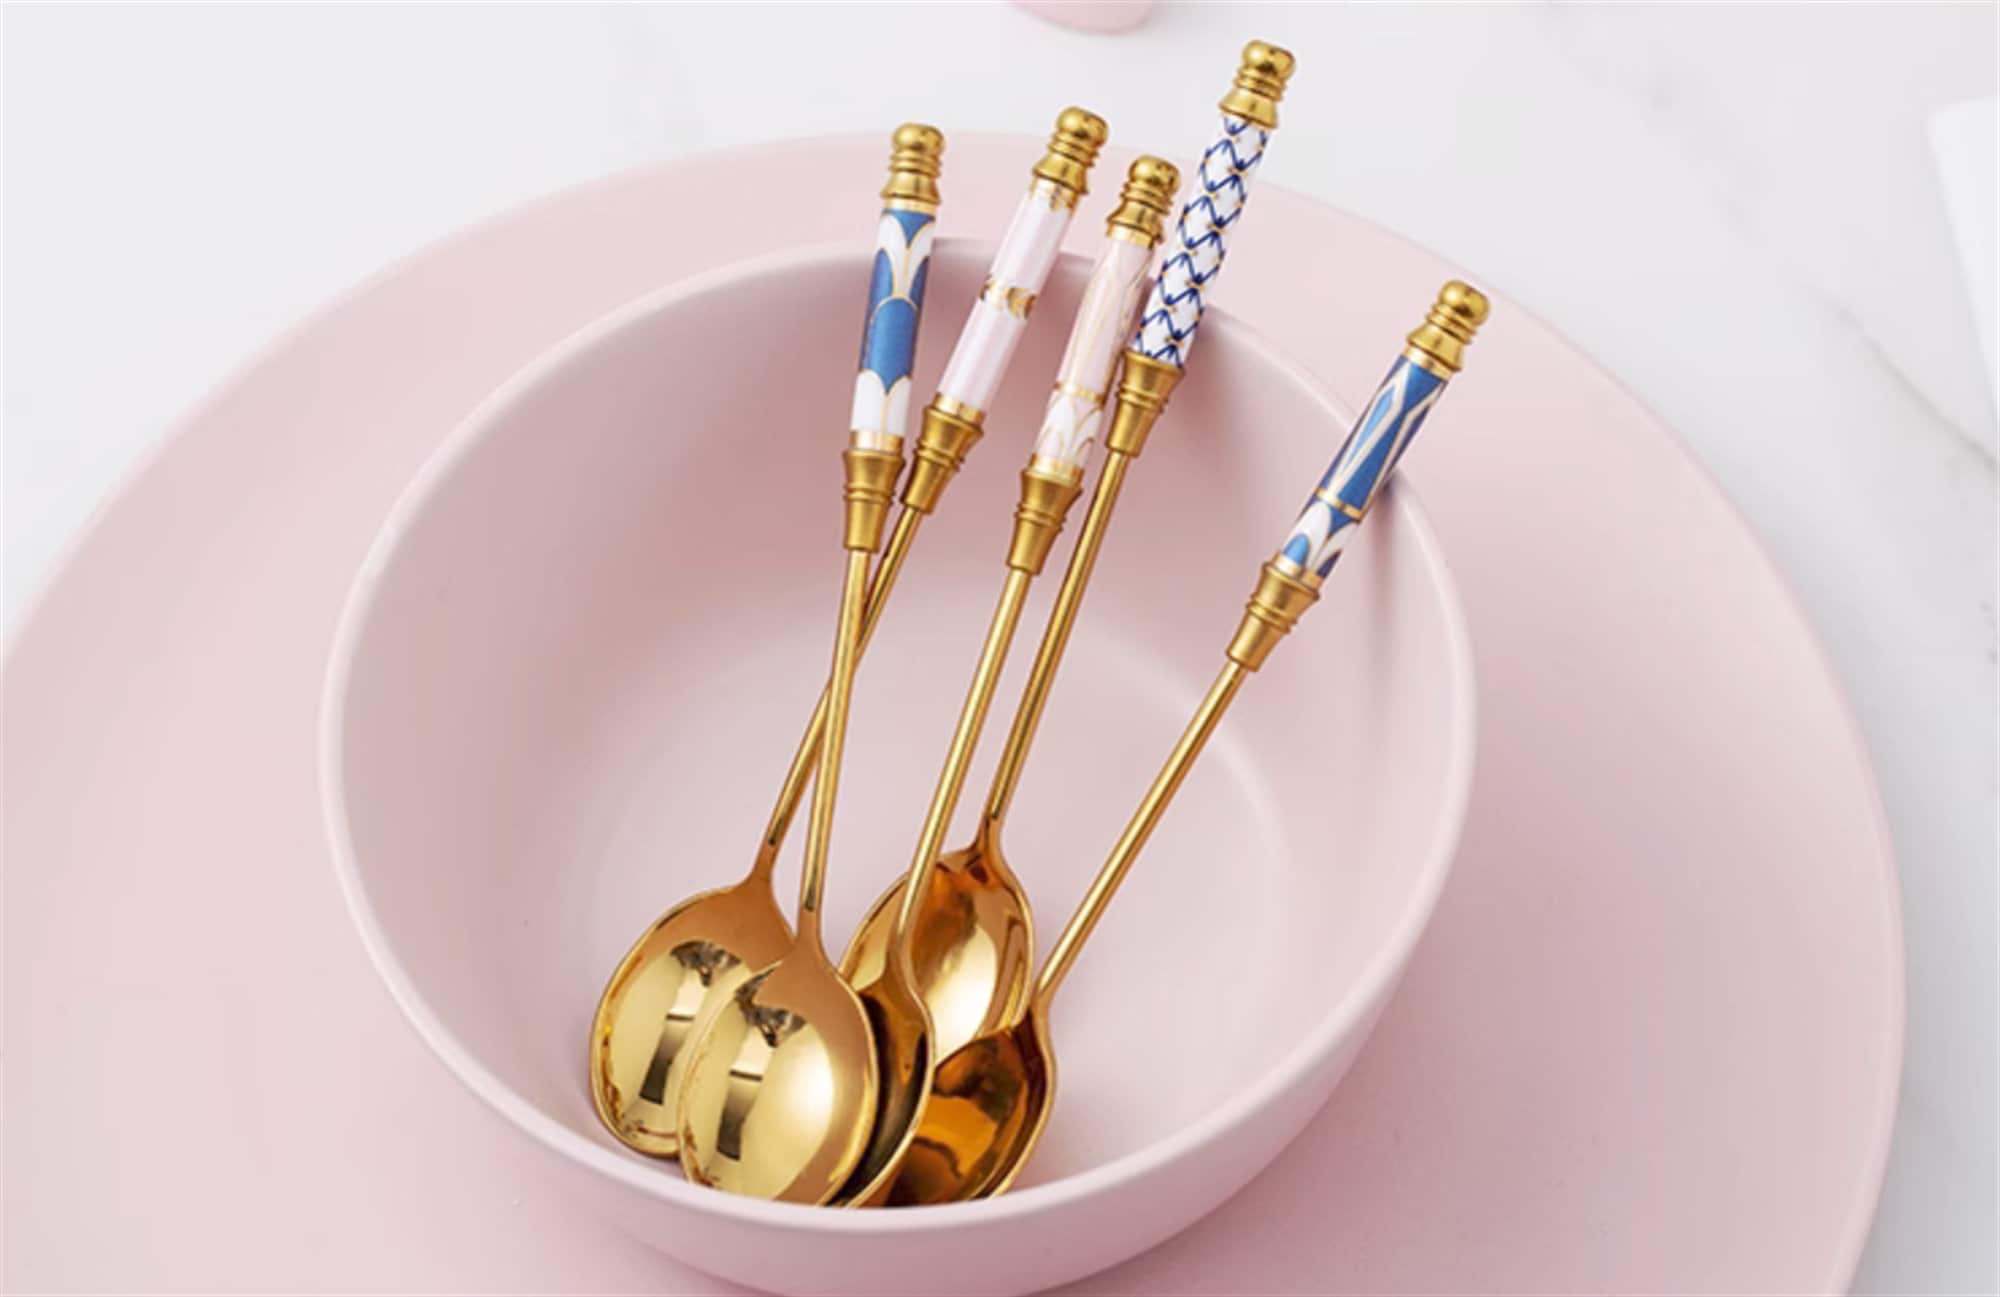 Tea Spoon Quality Coffee Spoon Stainless Steel Square Head Table Spoon  Measuring Spoon Flatware Spoons Long Handle For Kitchen - AliExpress